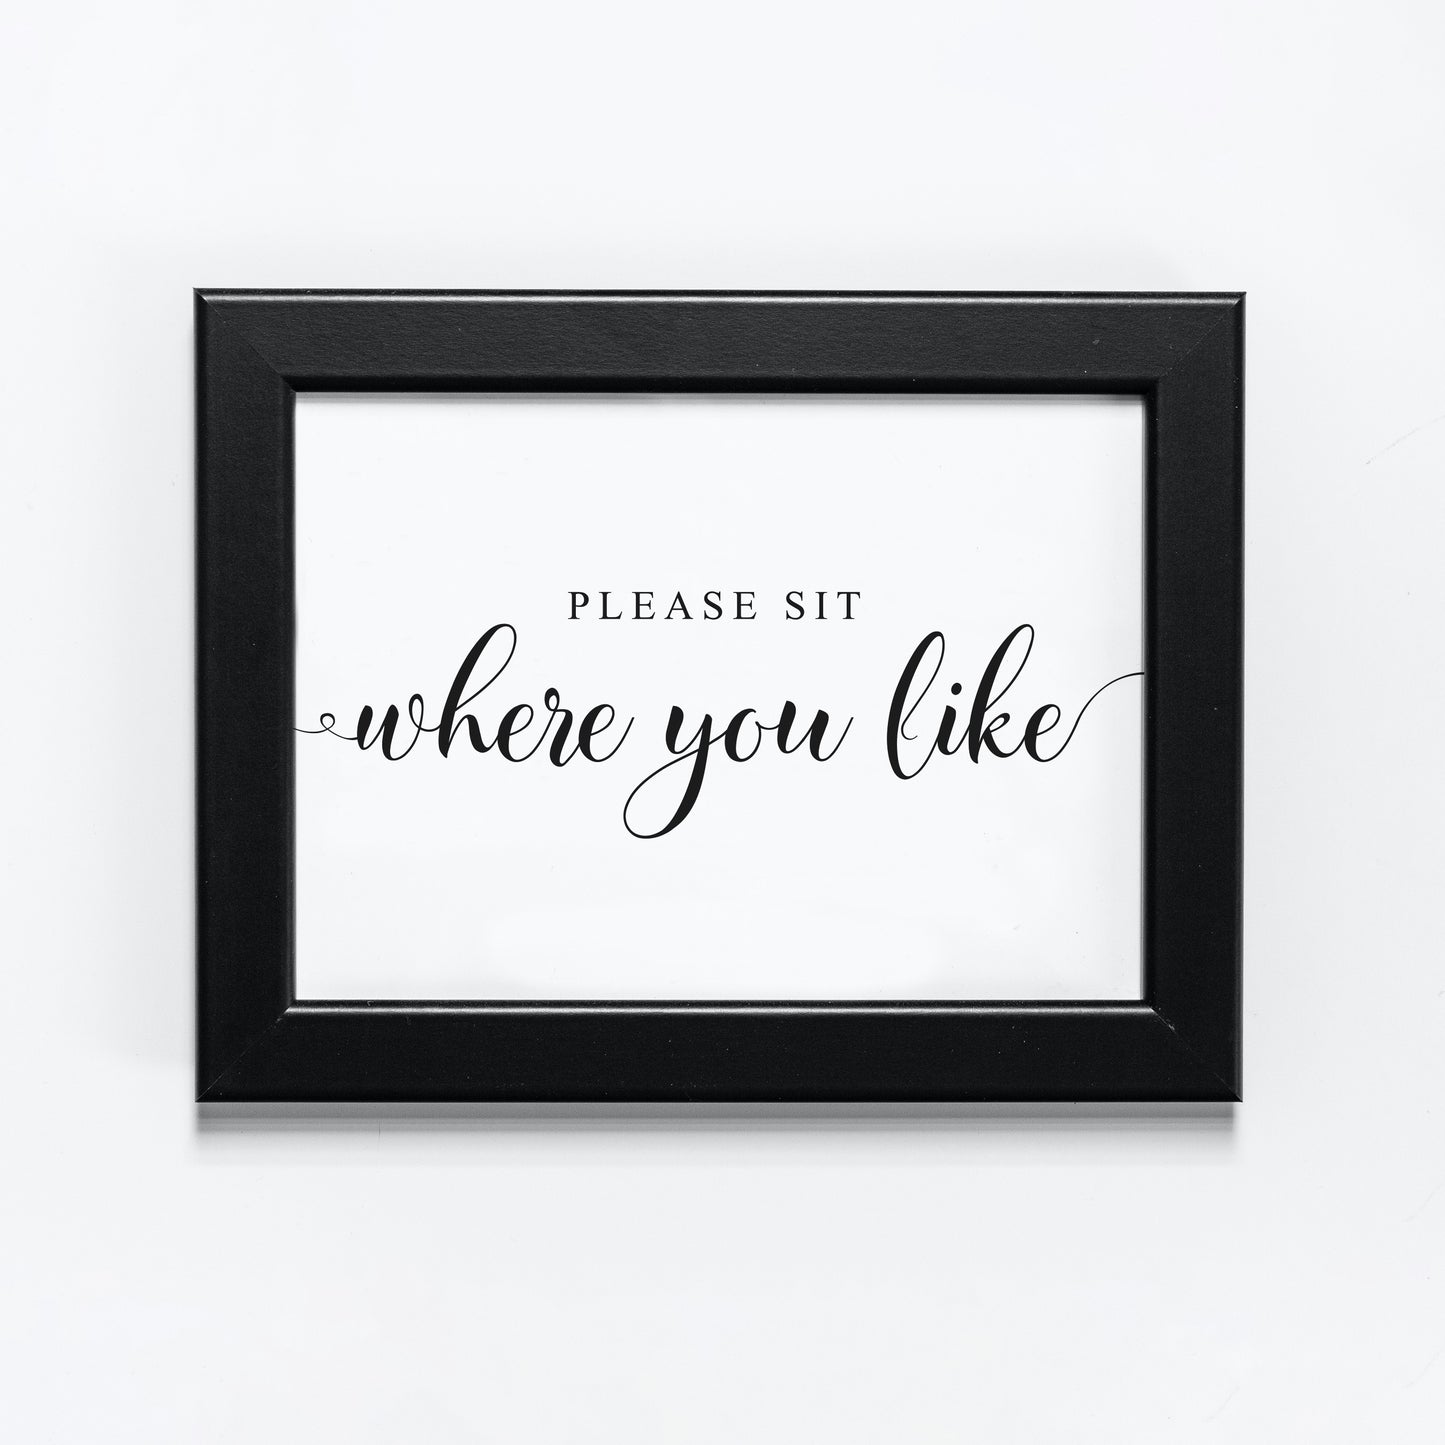 wedding seating sign in a black frame